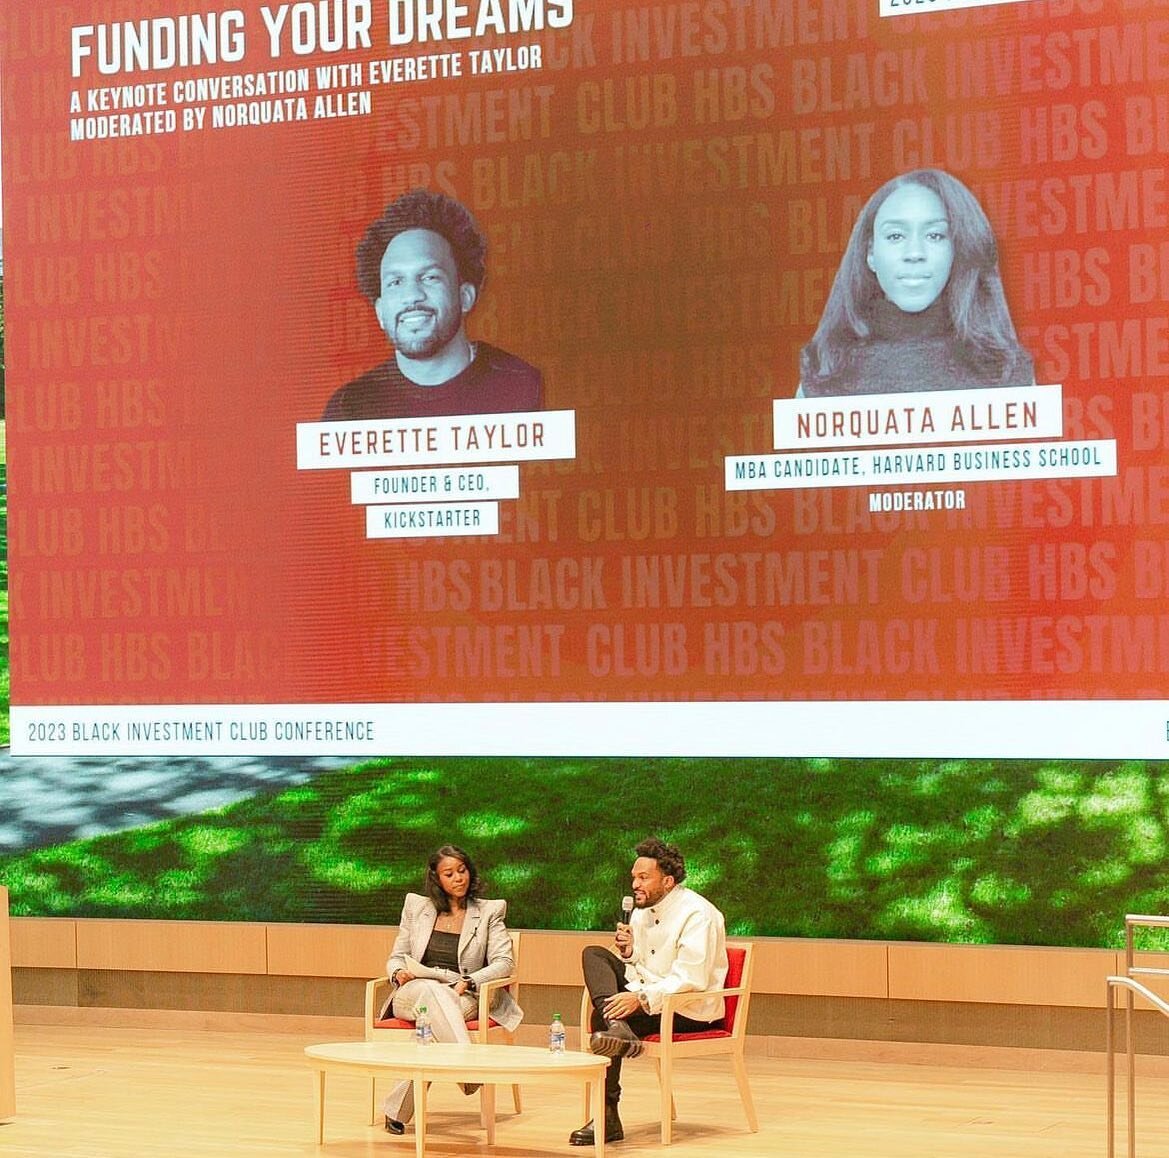 Szn 2 expert @everette✨ keynoting at @harvardhbs for the 2nd annual Black Investment Club Conference. 

Ev: &ldquo;People say money doesn&rsquo;t buy happiness, wealth does. Financial freedom creates peace of mind. Being able to find work life balanc